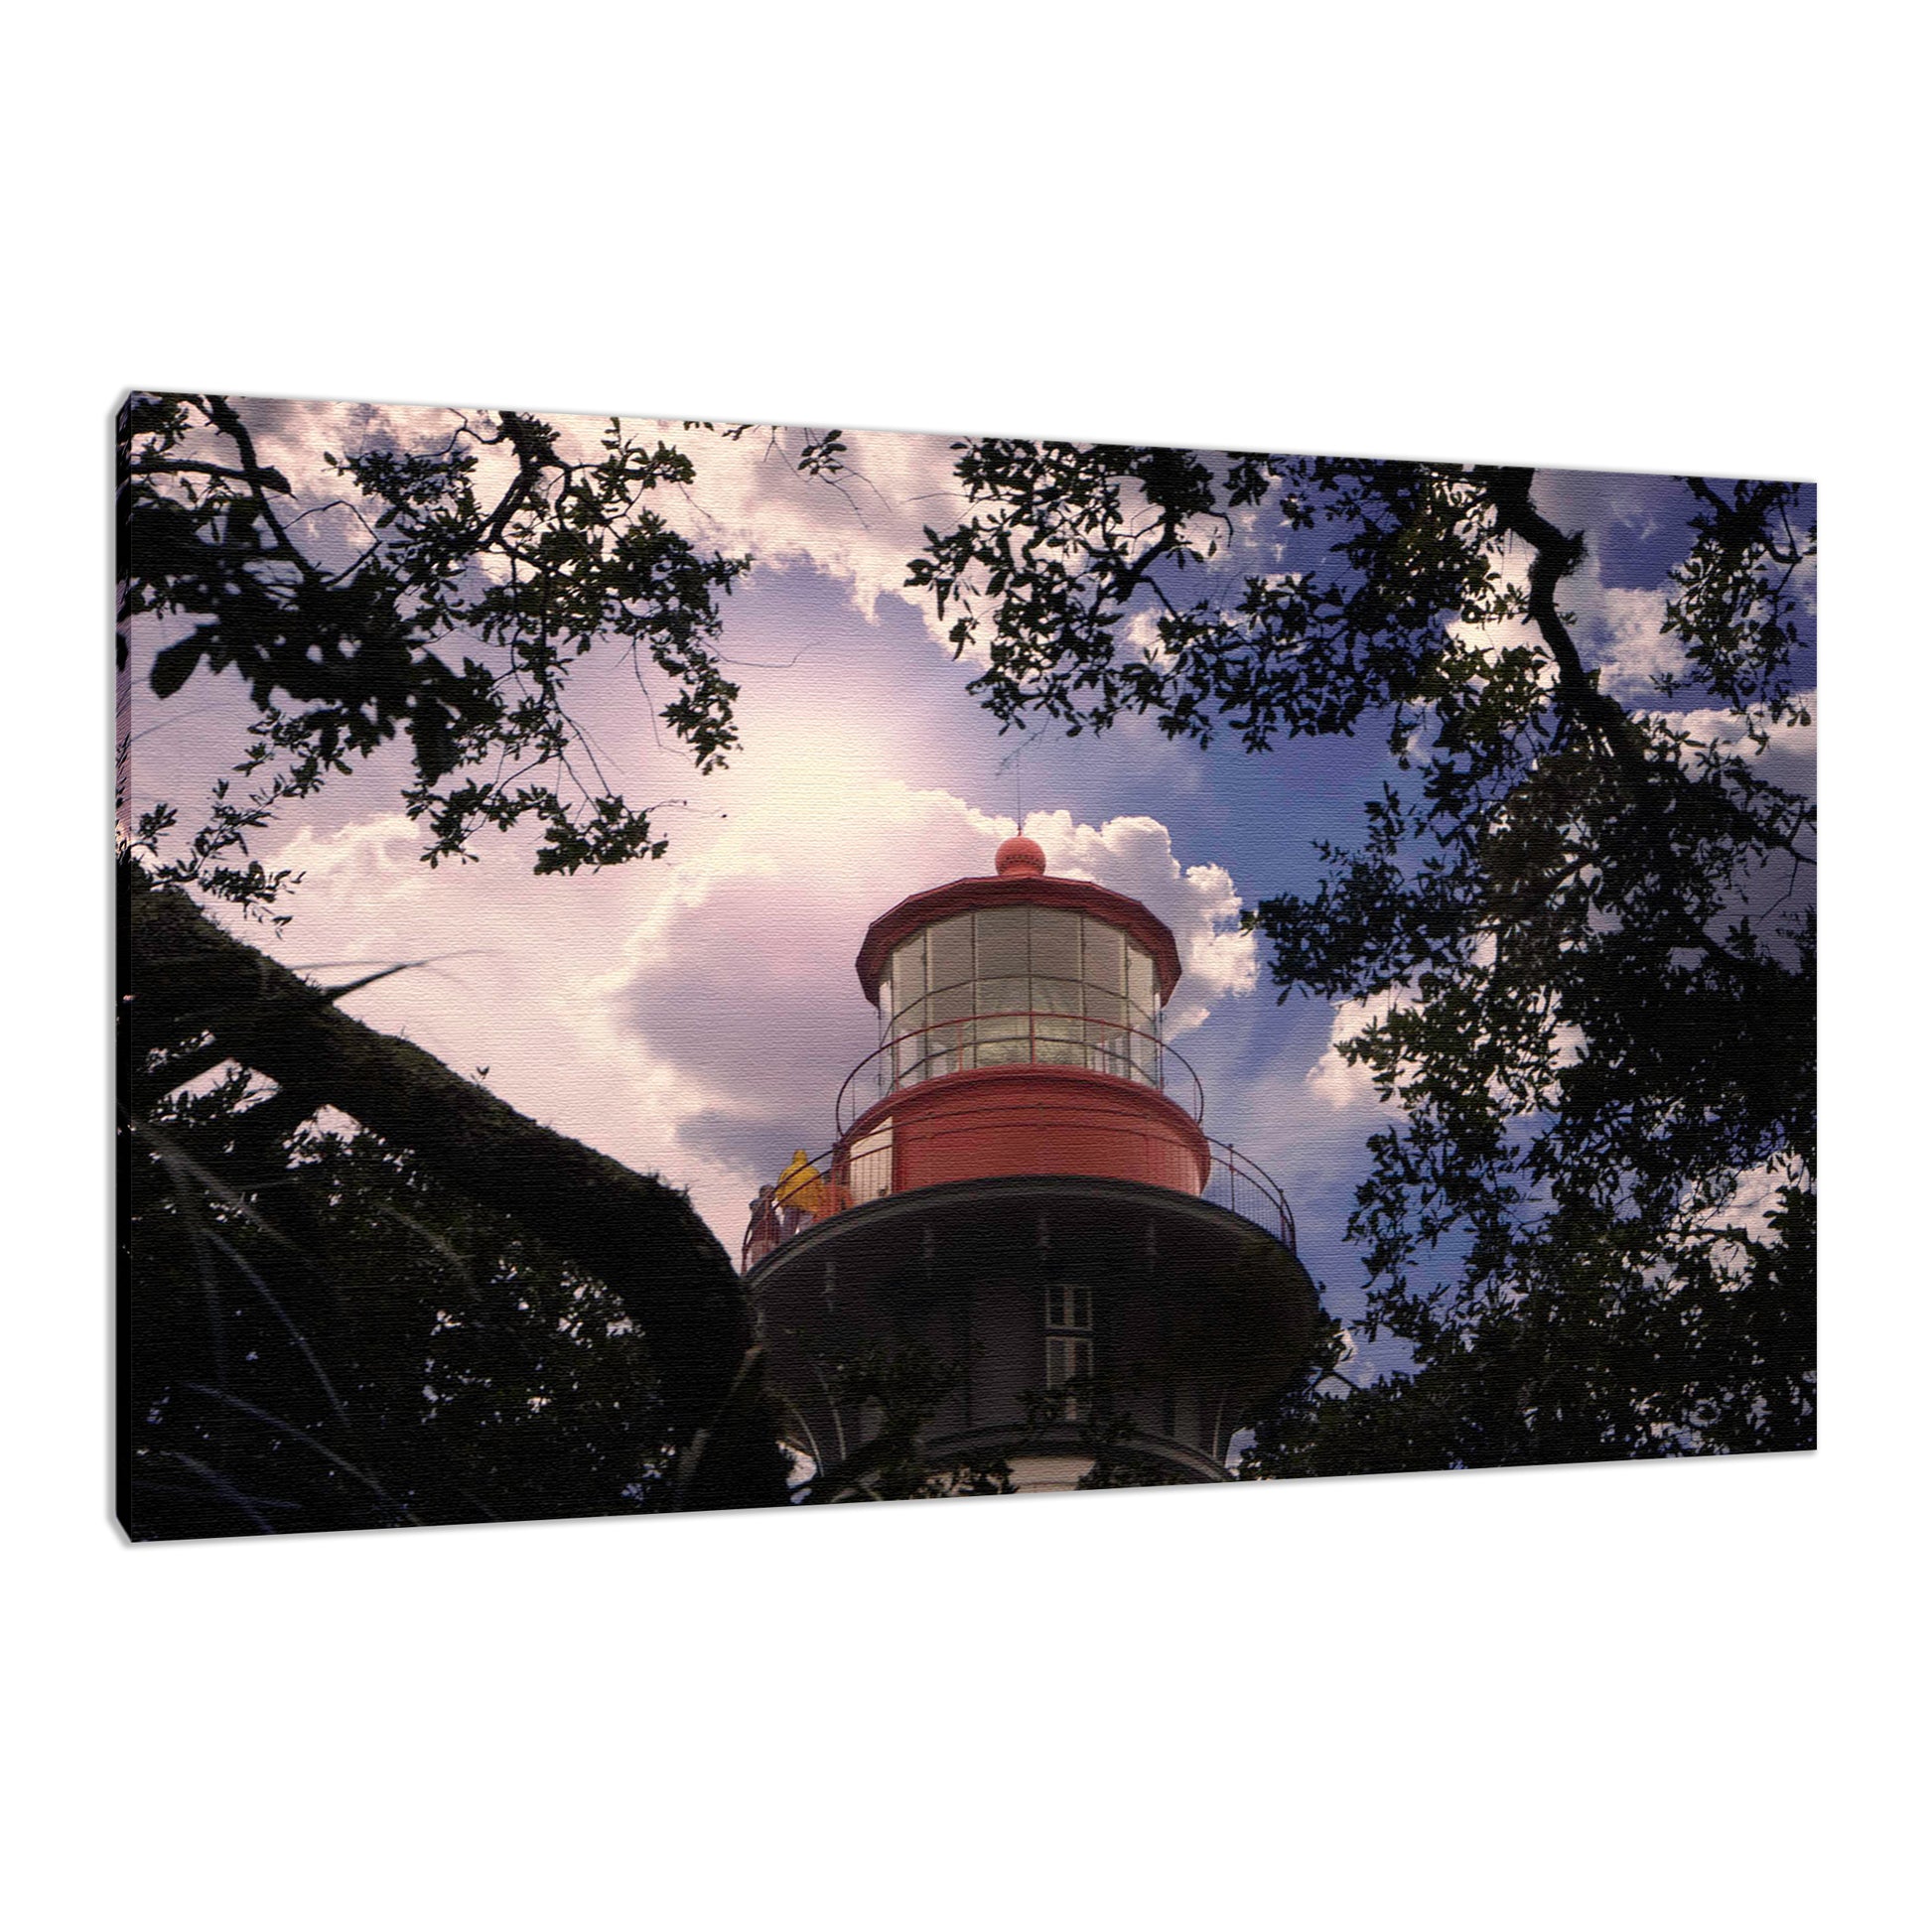 Small Beach Canvas Prints: Saint Augustine Lighthouse and Tree Branches Urban Building Photograph Fine Art Canvas Wall Art Print